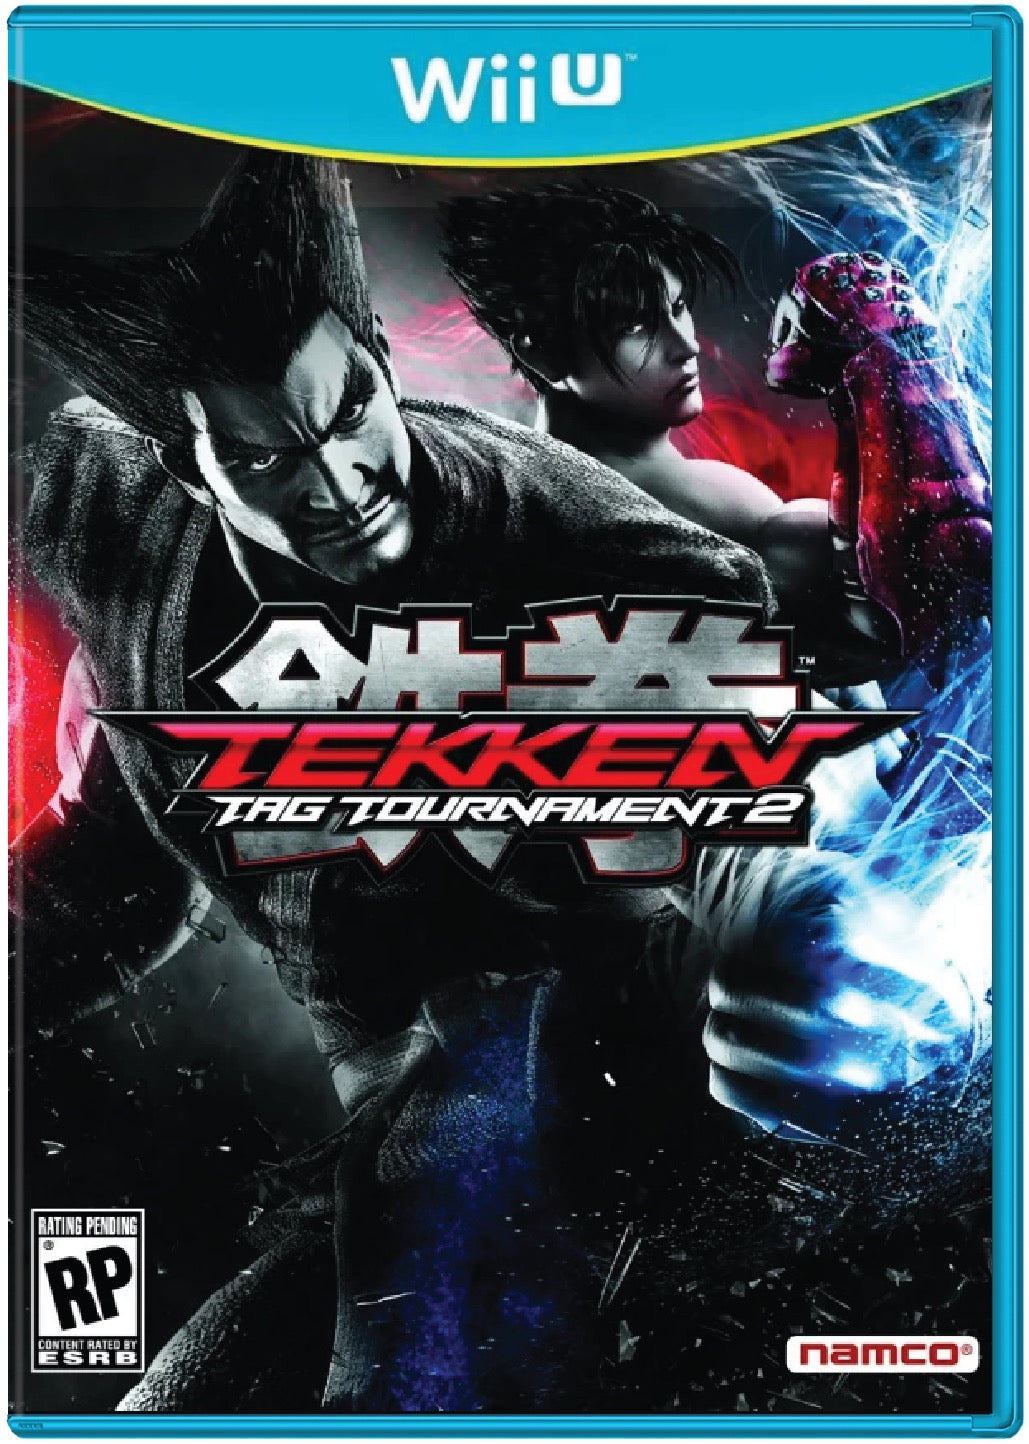 Tekken Tag Tournament 2 Cover Art and Product Photo